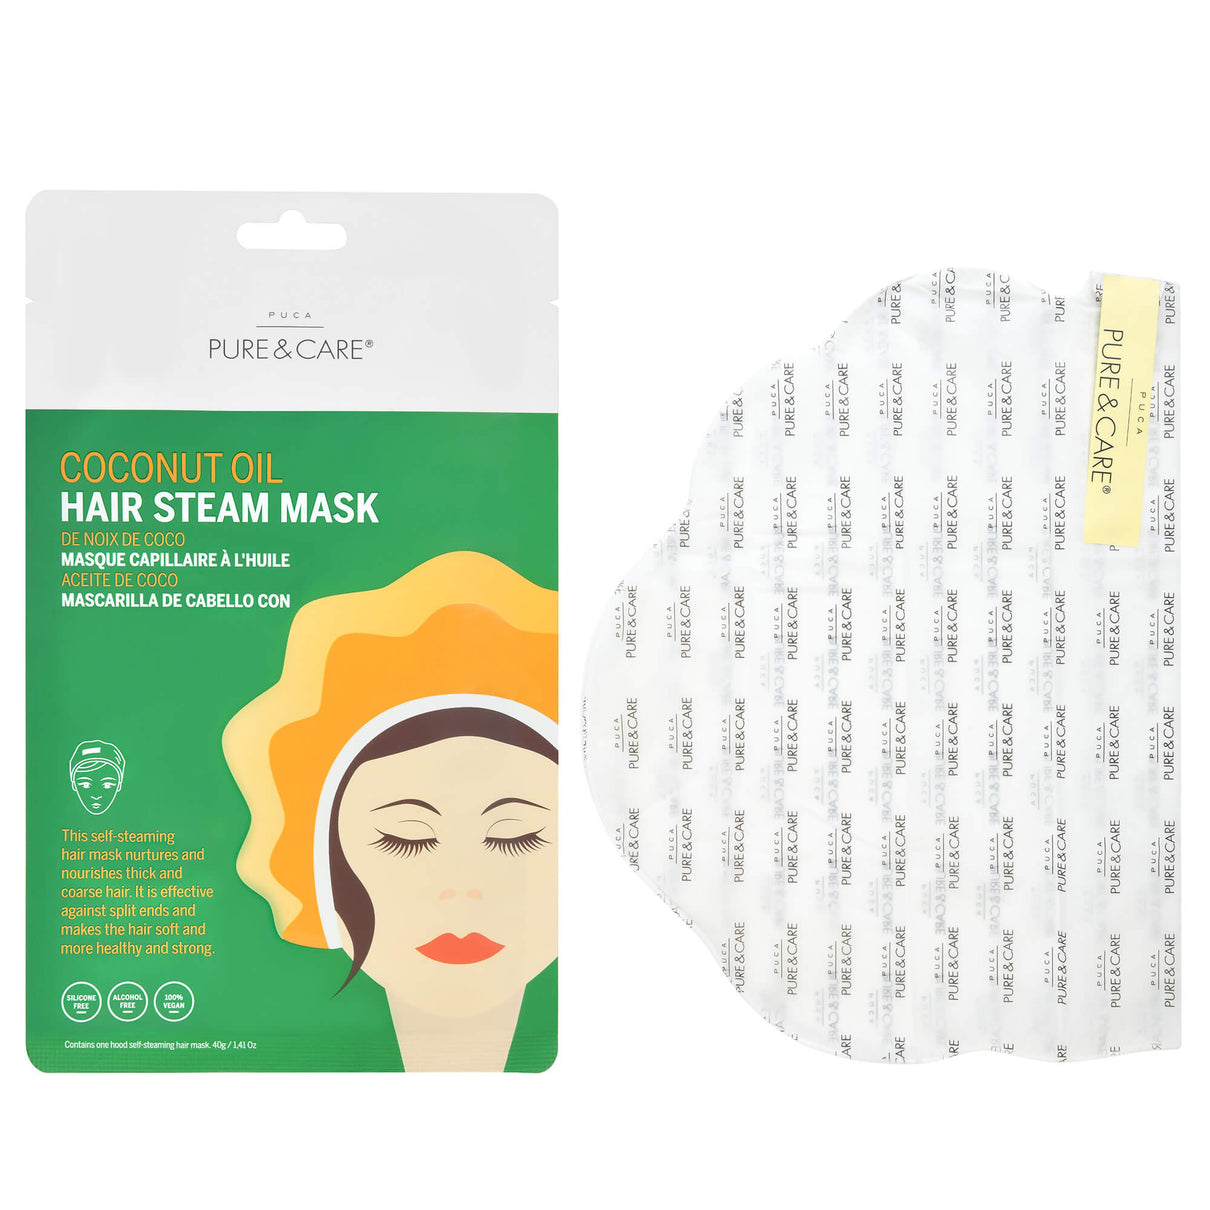 Coconut oil hair steam mask I PUCA - PURE & CARE